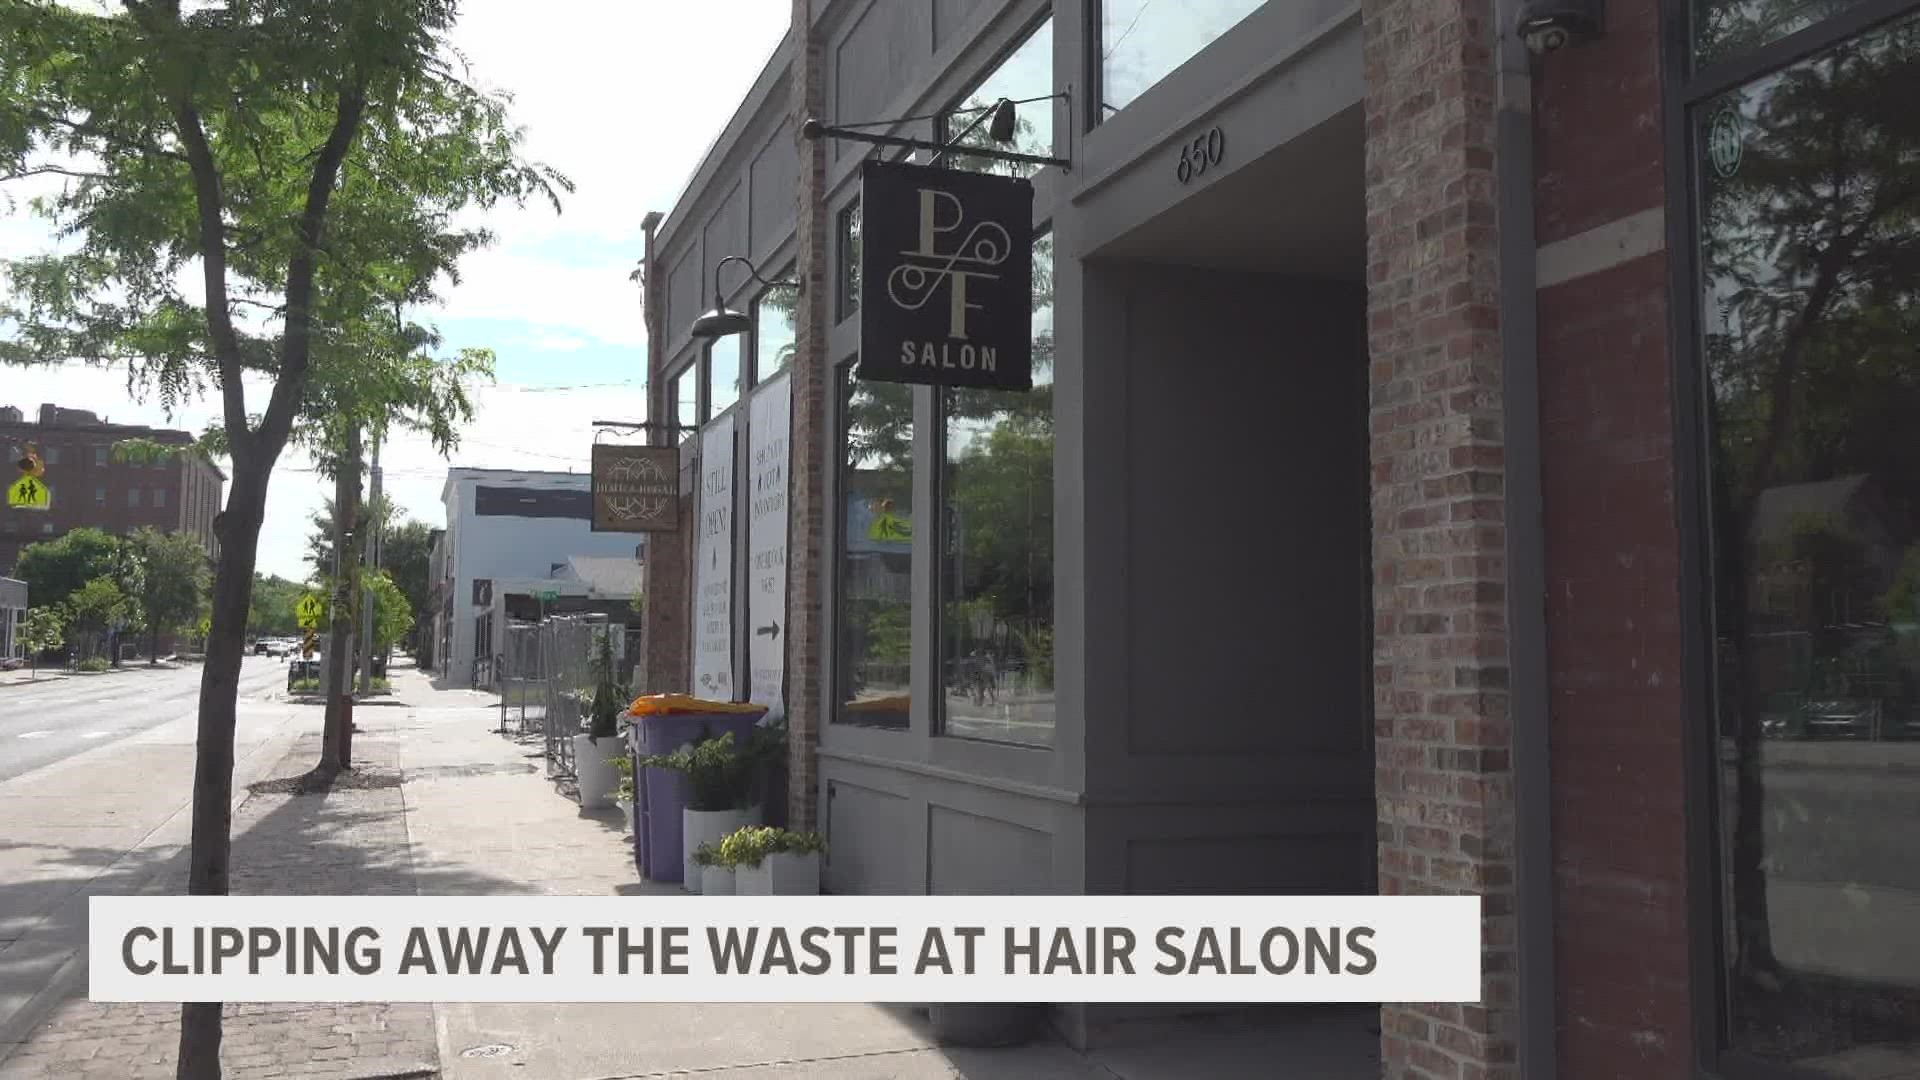 Waste Warriors, or salon owners part of Green Circle Salons, are keeping people and the planet beautiful. Palace Flophouse in Grand Rapids is one of them.